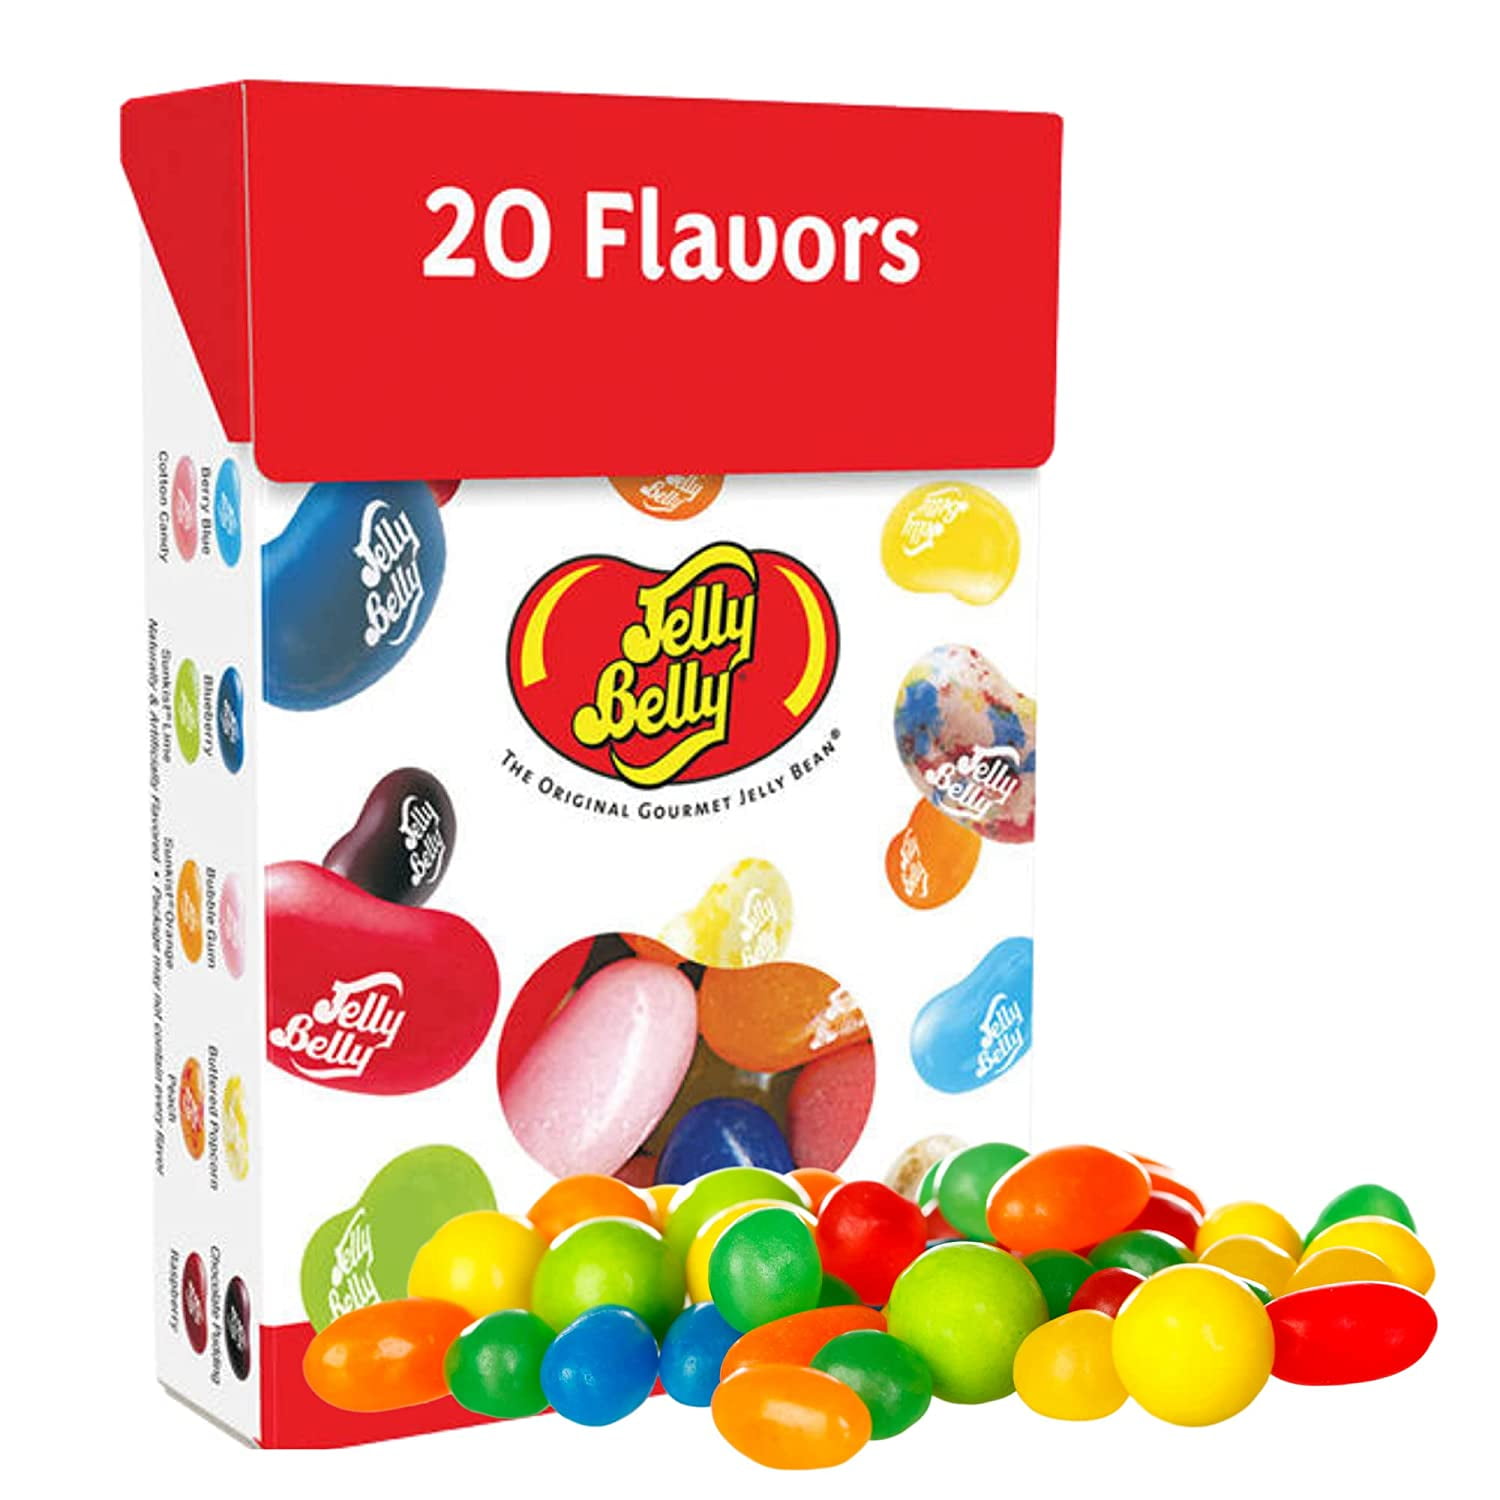 Jelly Bean 20 Flavor Assorted Beans Flip-Top Box Individual Packs, Bulk  Fruit Flavored Gourmet Chewy Candies for Gift Baskets, Pack of 3, 1 Ounces